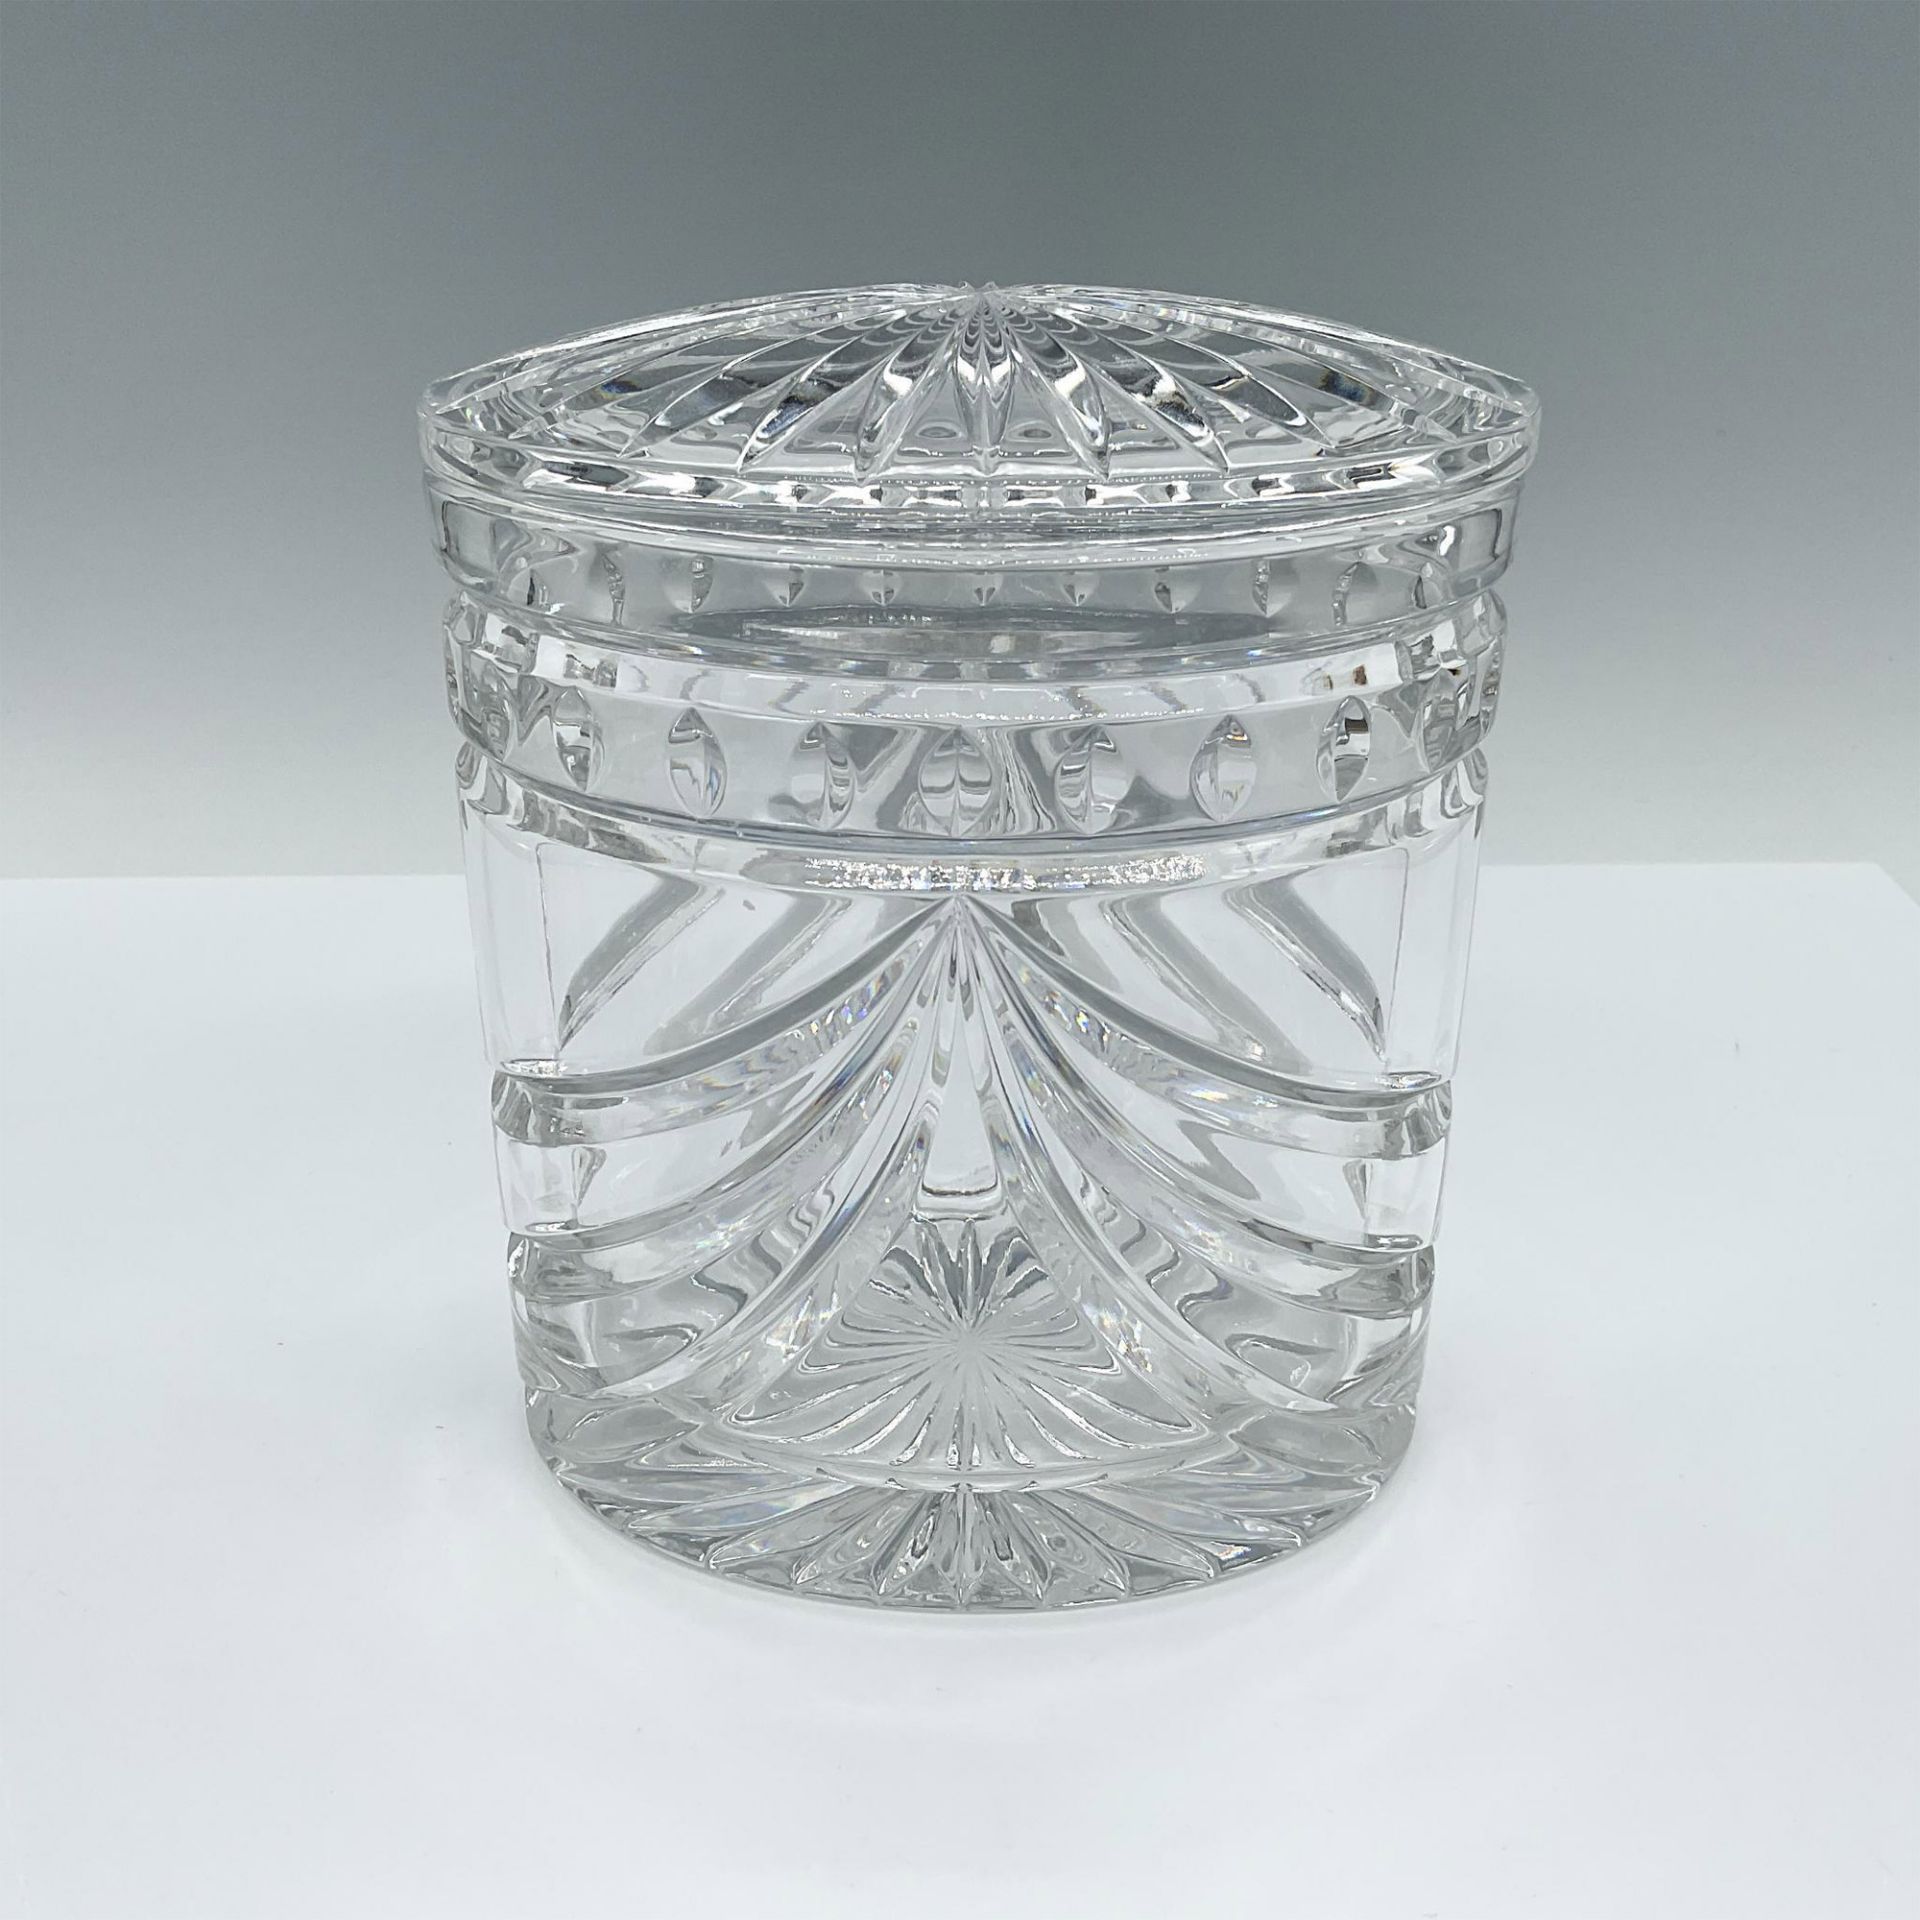 Waterford Crystal Oval Shaped Cookie Jar, Overture Pattern - Image 2 of 4